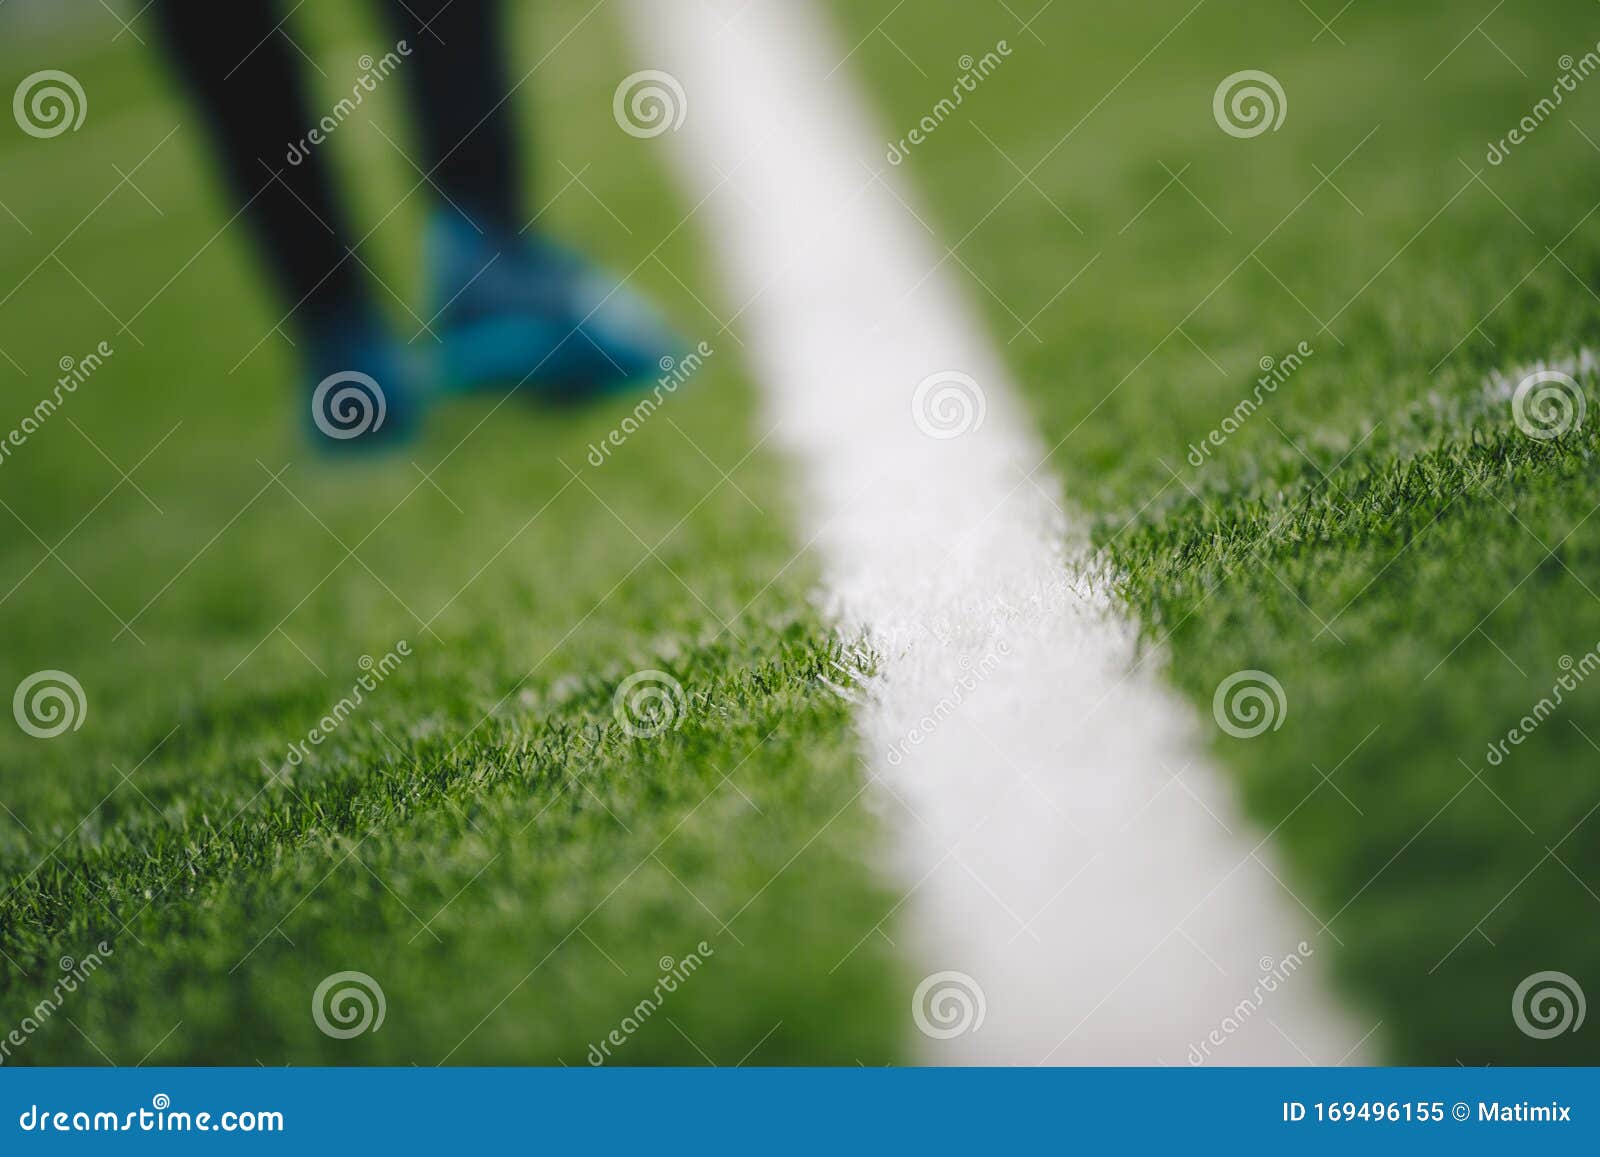 sports grass field pitch and white sideline